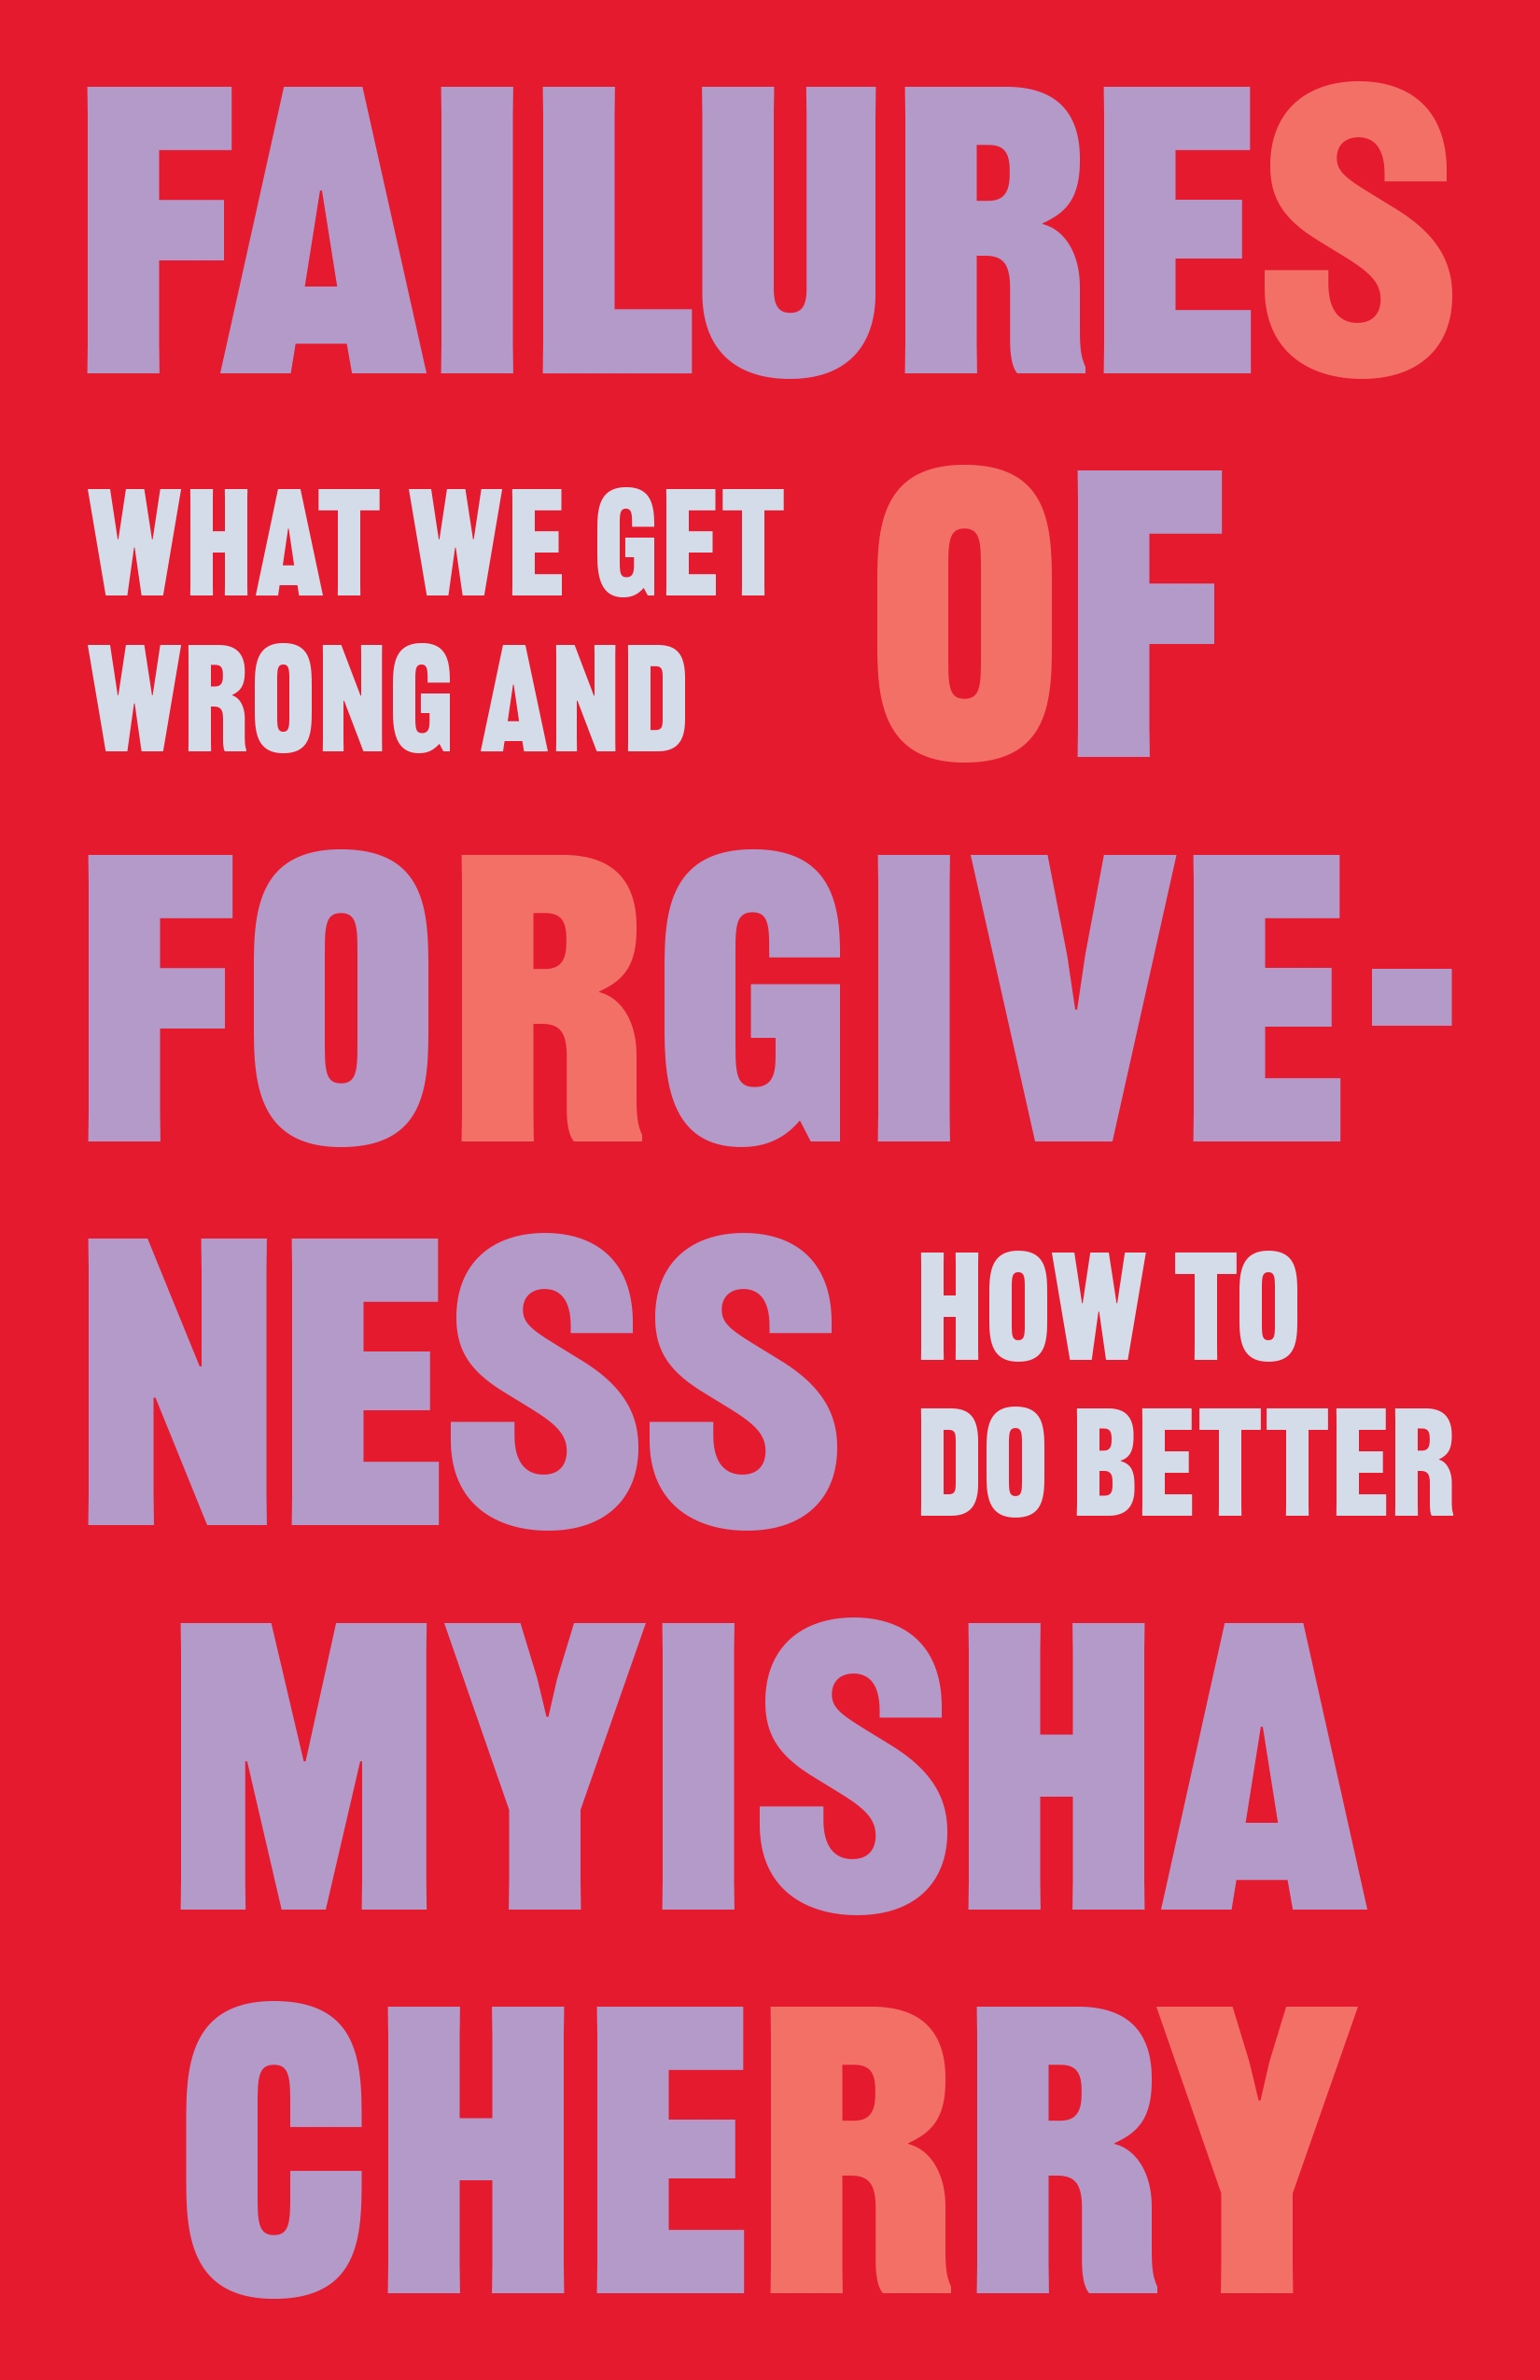 FAILURES OF FORGIVENESS: WHAT WE GET WRONG AND HOW TO DO BETTER